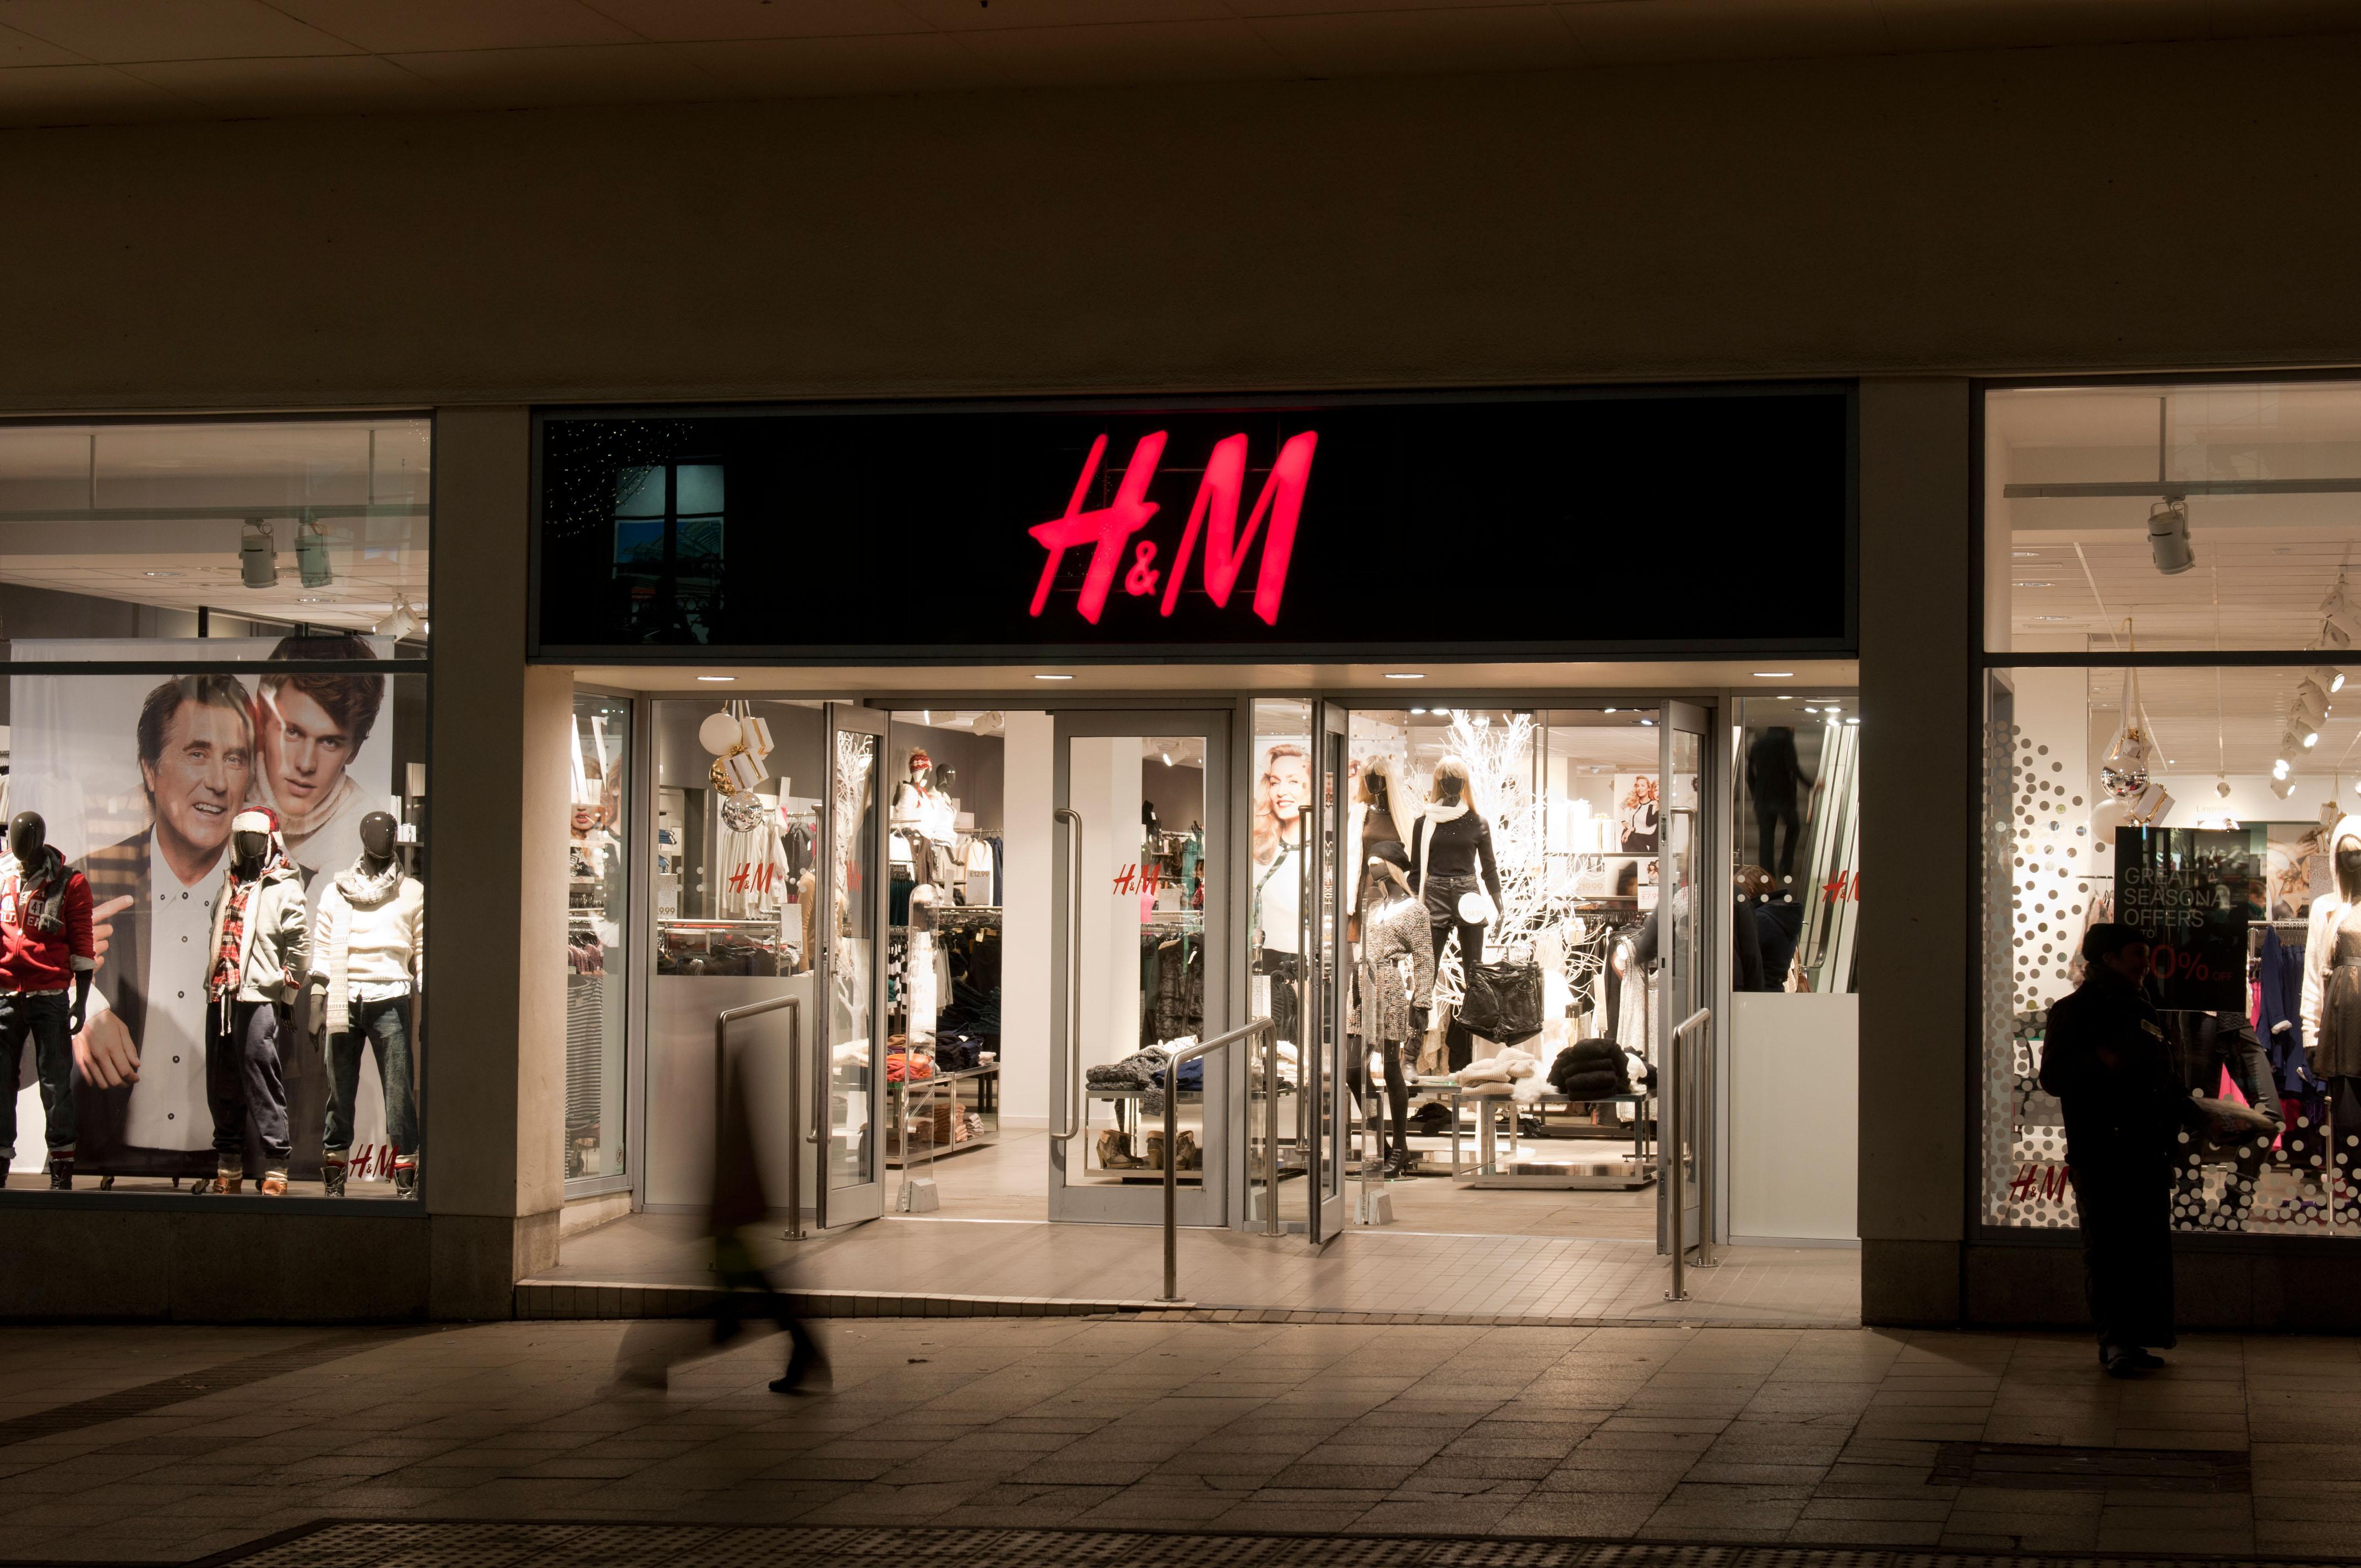 Report says Iranian hackers broke into H&M Israel